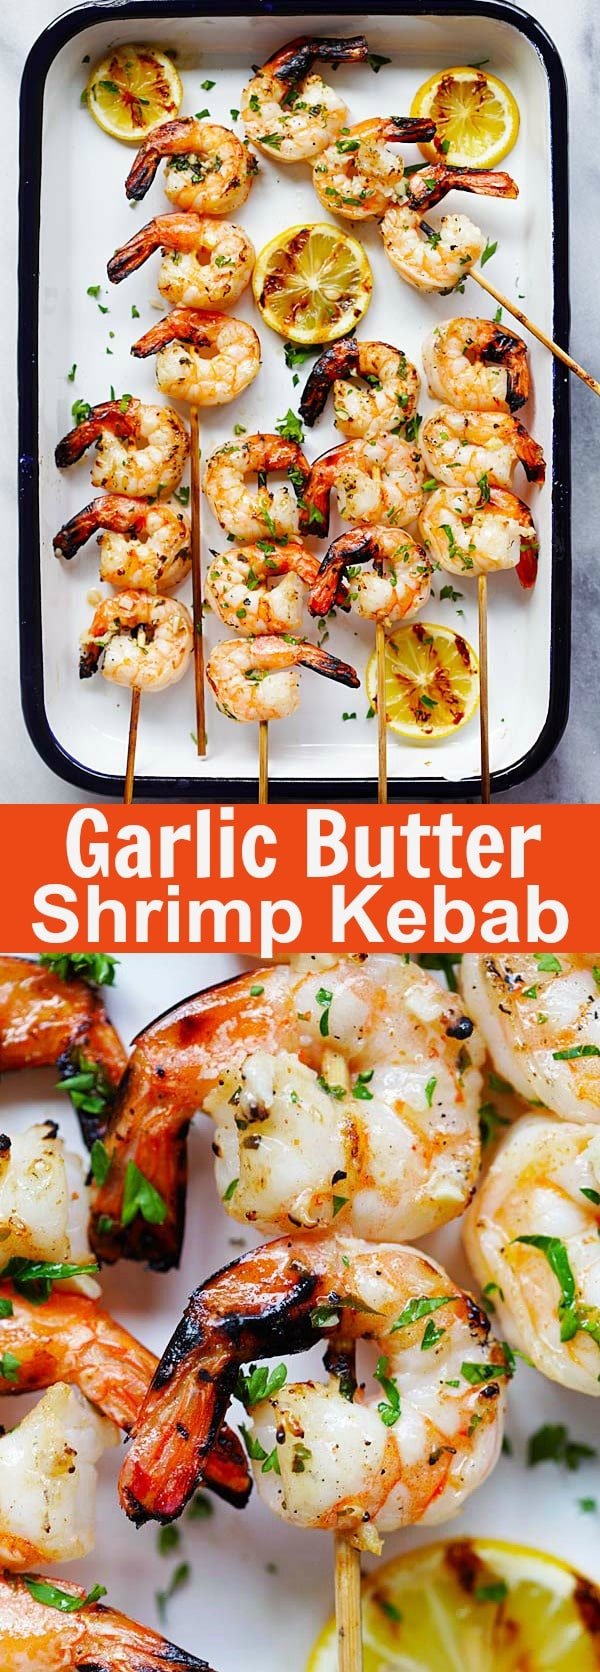 Garlic Butter Shrimp Kebab – juicy, succulent and perfectly grilled shrimp kebab with garlic butter and lemon juice. A guaranteed crowd pleaser | rasamalaysia.com